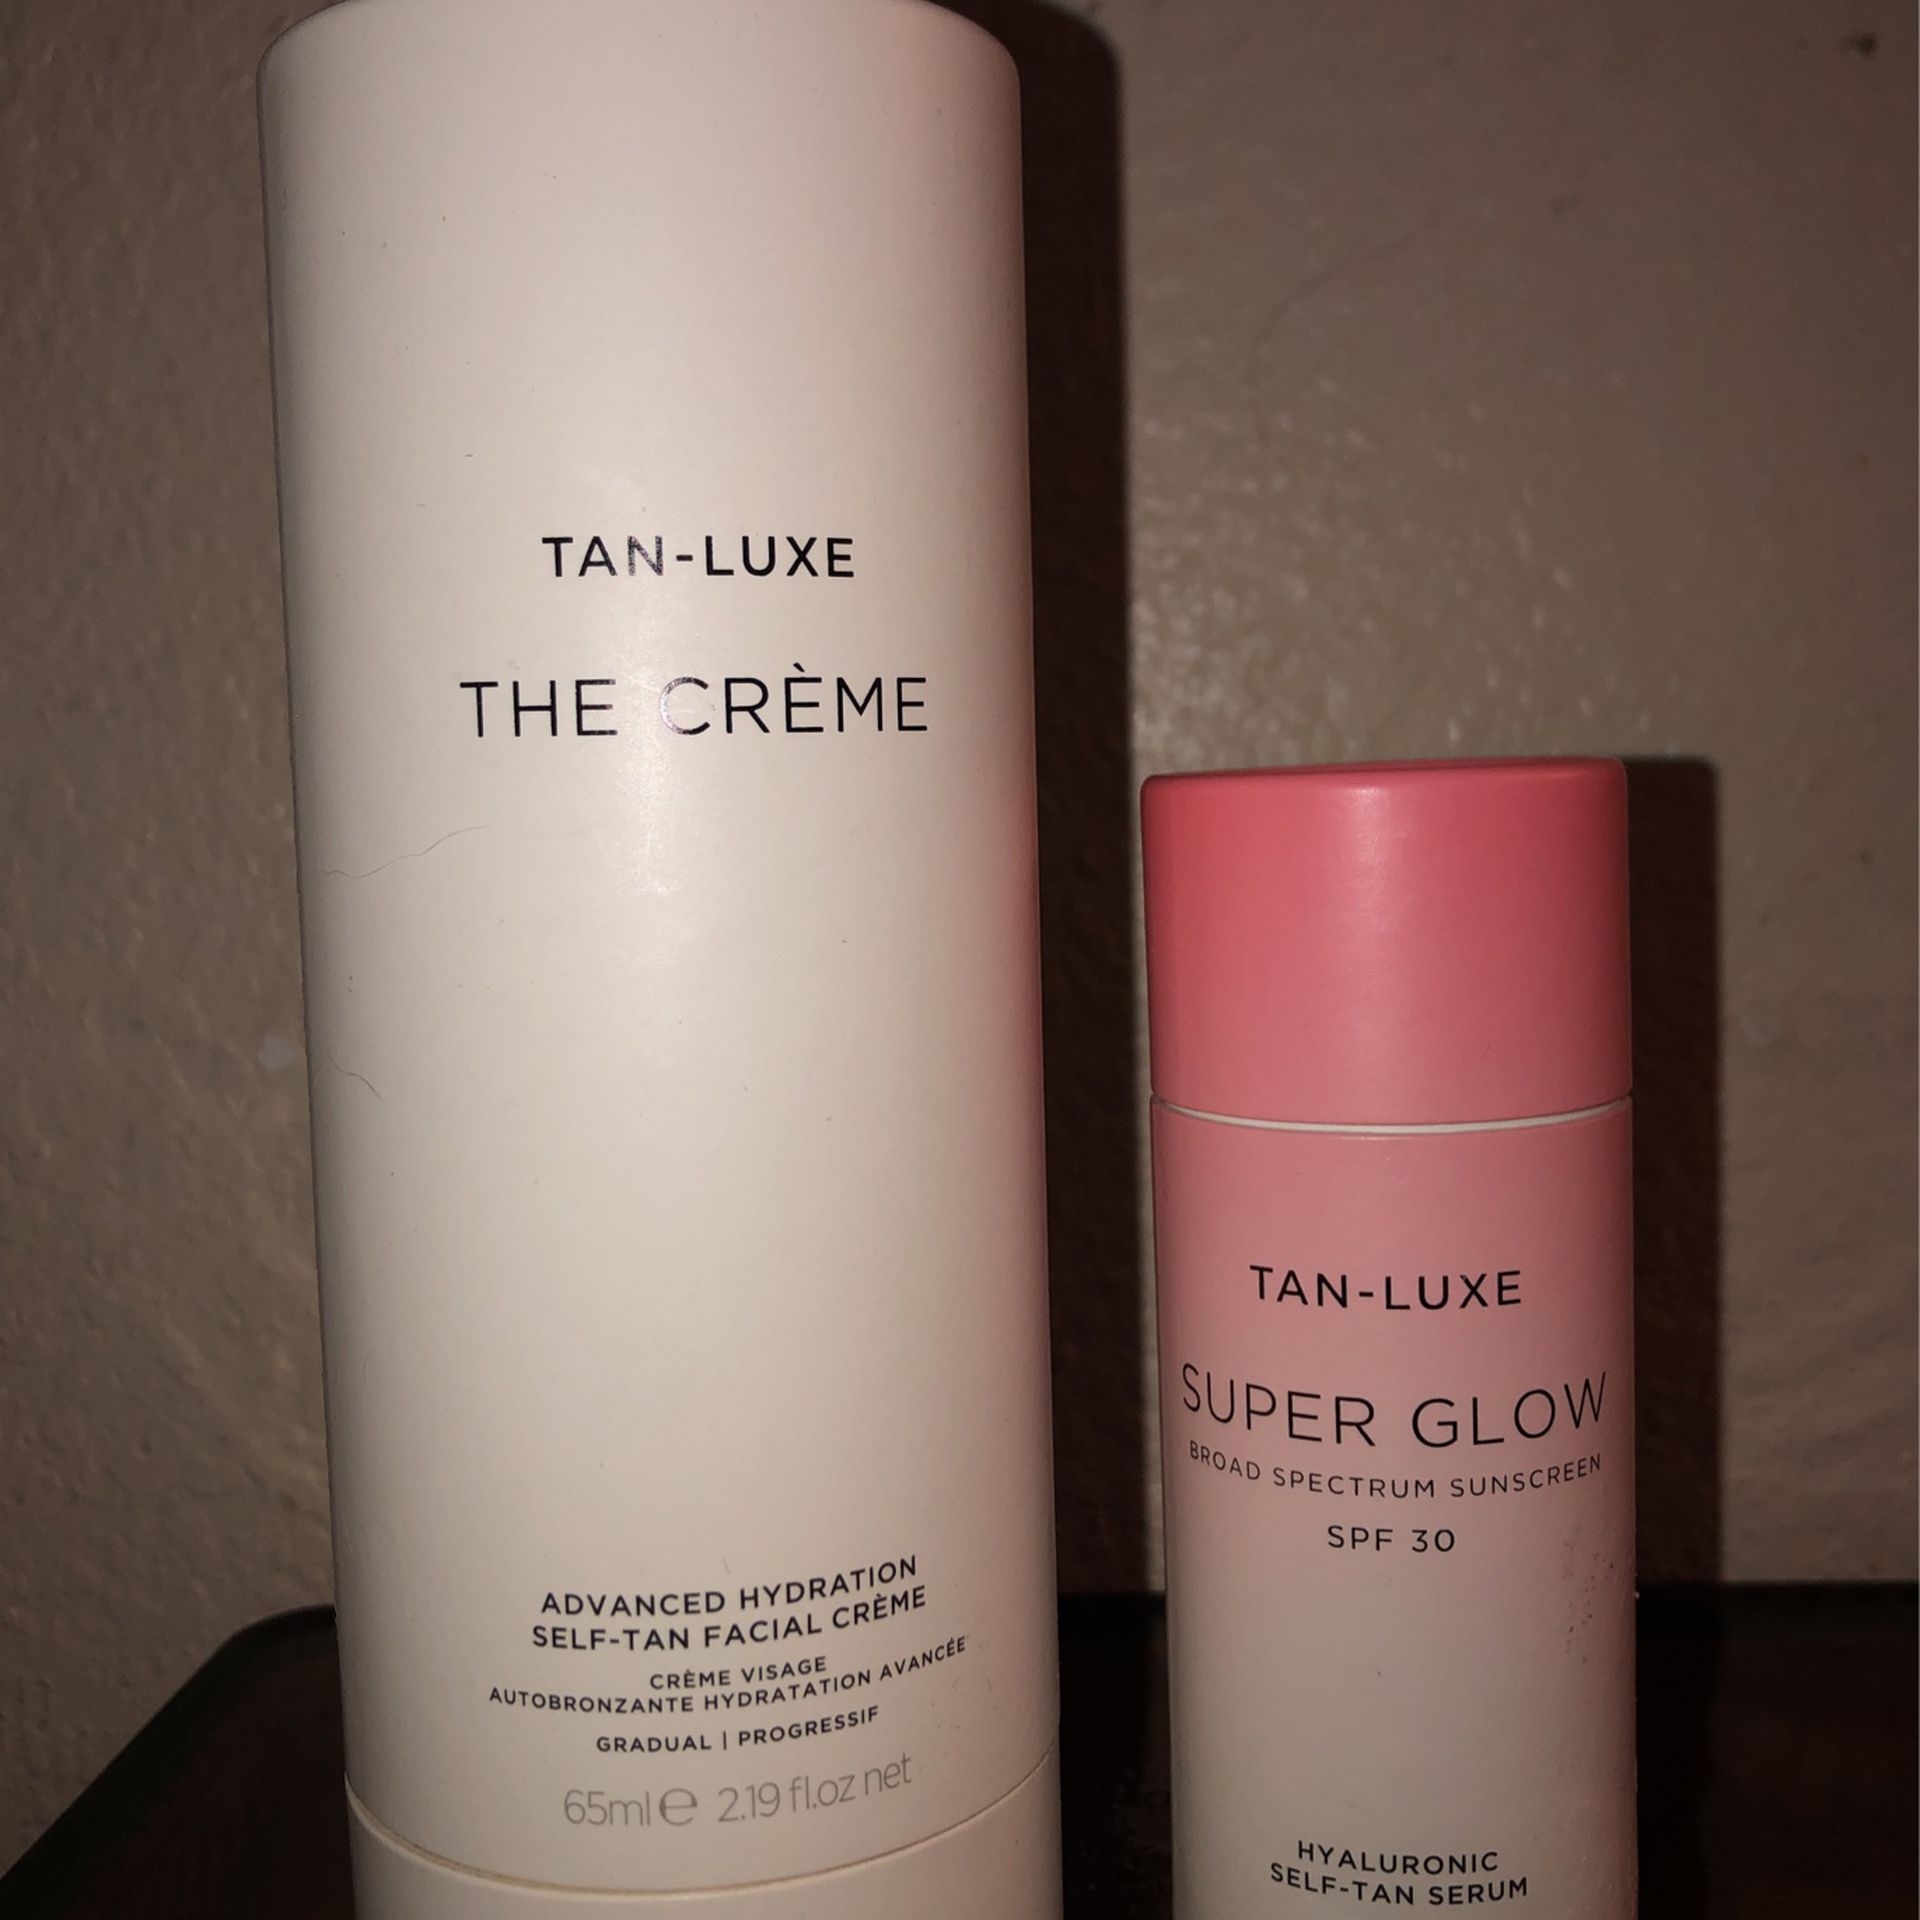 Brand NEW! ☀️    Tan-Luxe Self Tanning Products - The Crème & Super Glow((((PENDING PICK UP 5-6pm)))